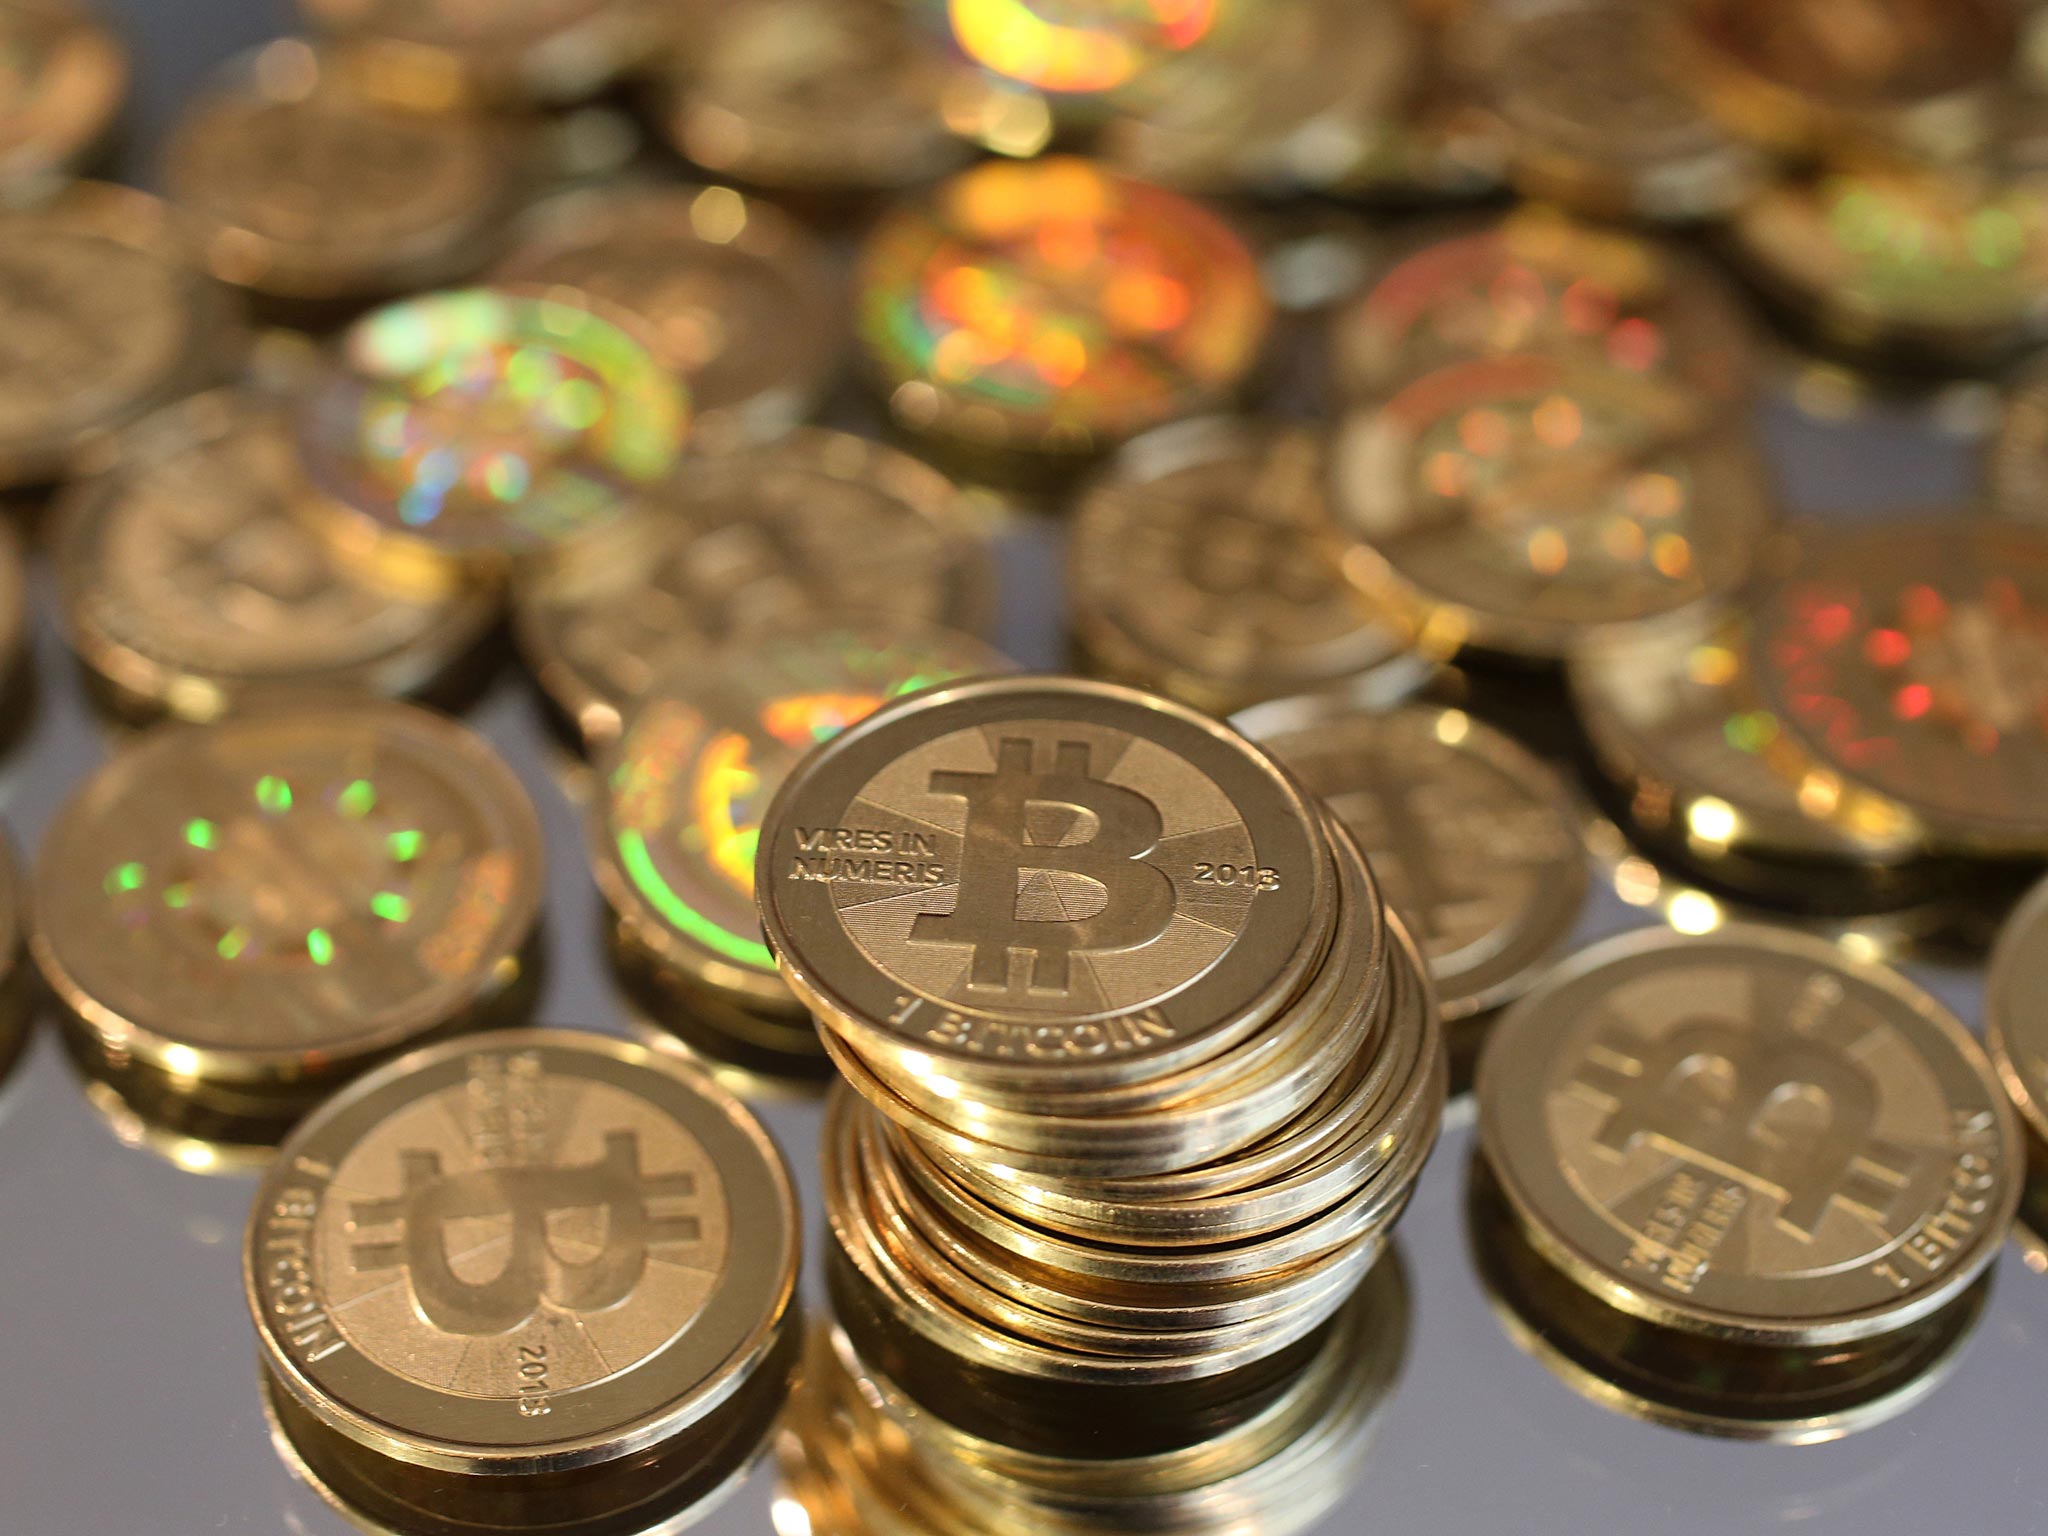 Bitcoin's rise has hampered by hacks at exchanges and was named the worst investment of 2014